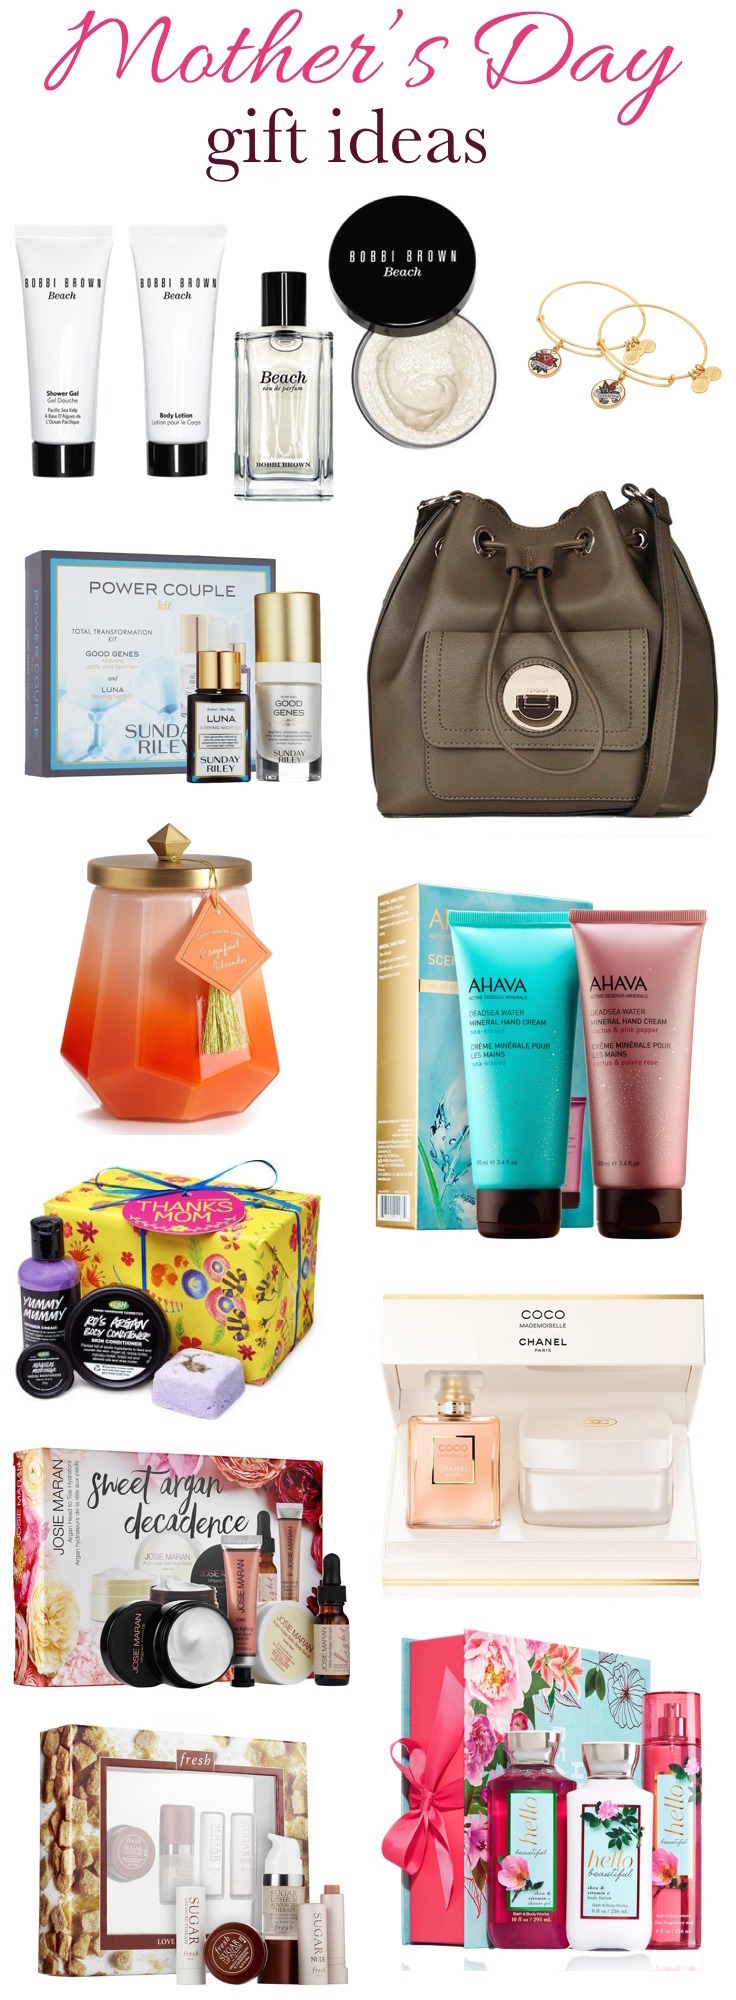 Mother’s day is almost here (May 8th)... have you picked out the perfect gift to thank her for all she does? Here are 10 Mother's day gift ideas (under $100) that any mom would love!